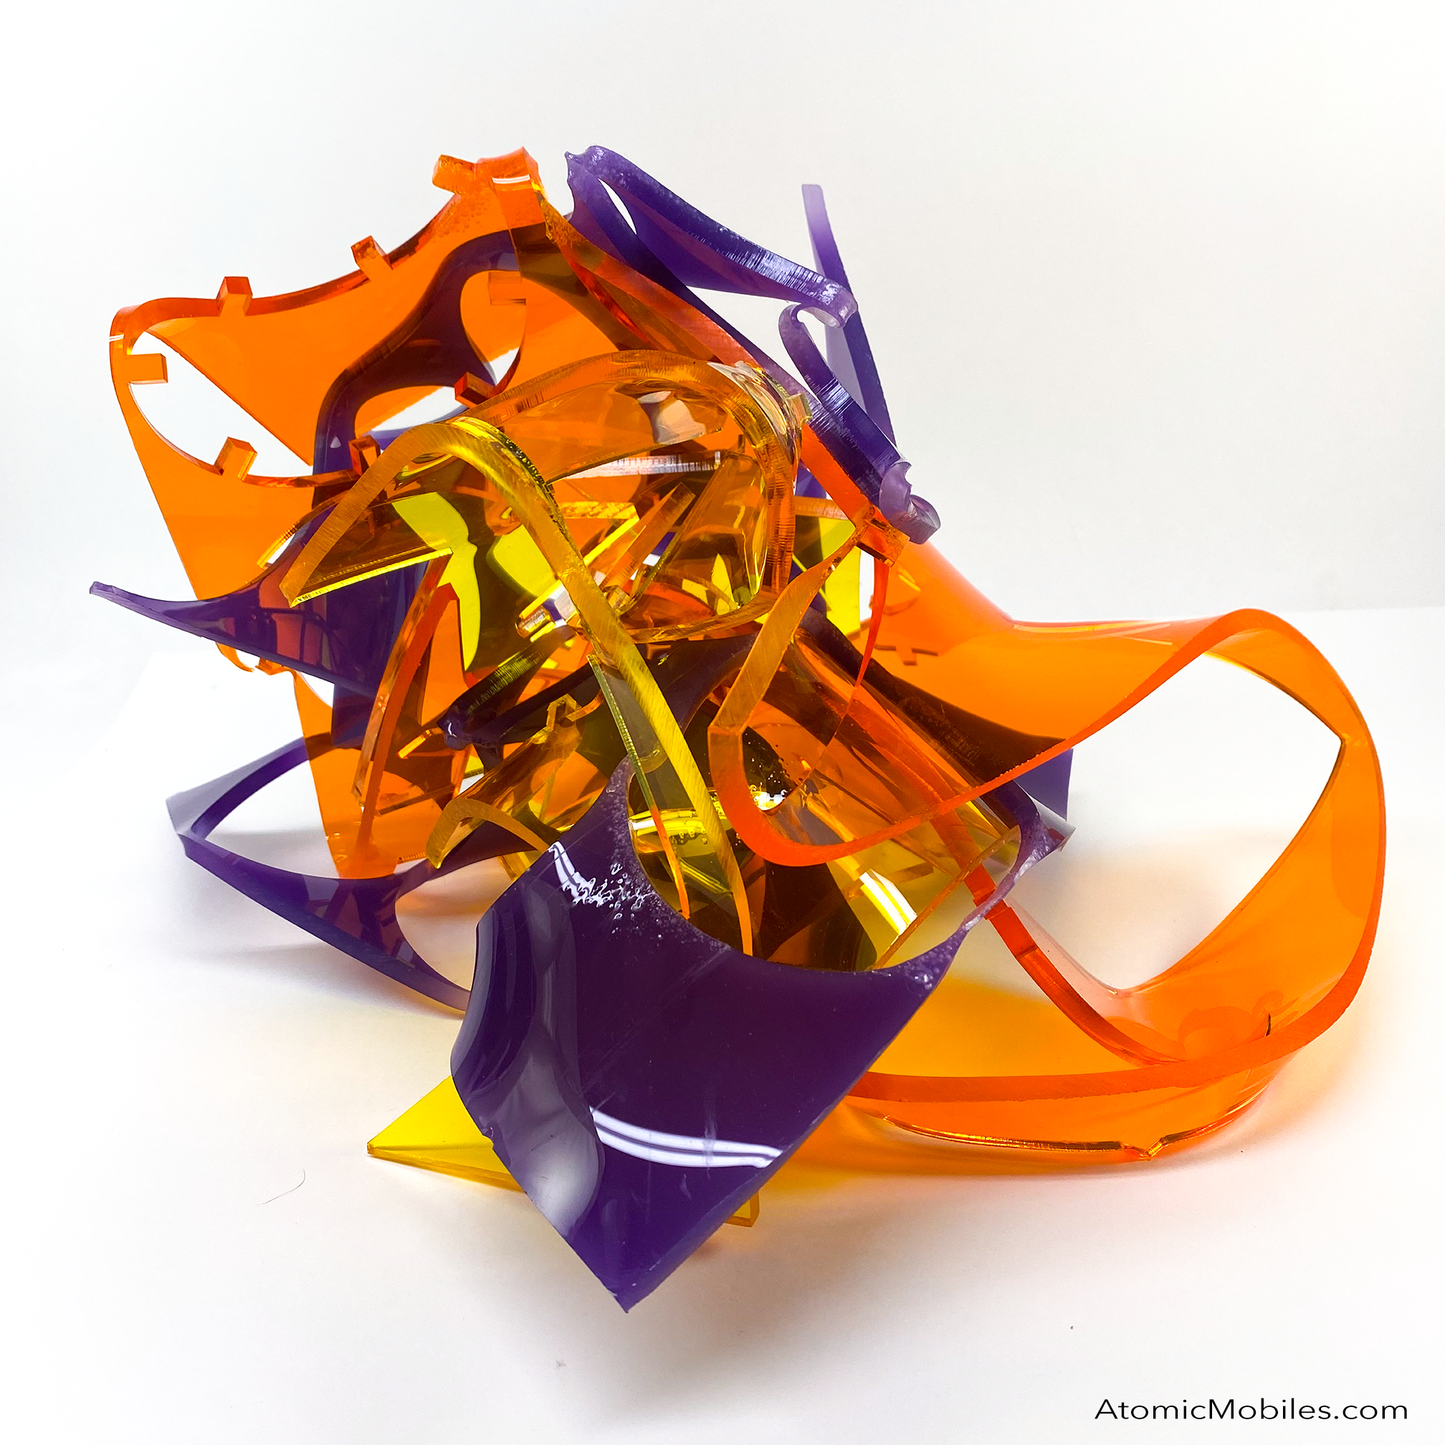 Another view of one of a kind Stellar abstract art sculpture in bold clear orange, clear yellow, and opaque purple - made from recycled/upcycled acrylic plexiglass by Debra Ann in Los Angeles of AtomicMobiles.com